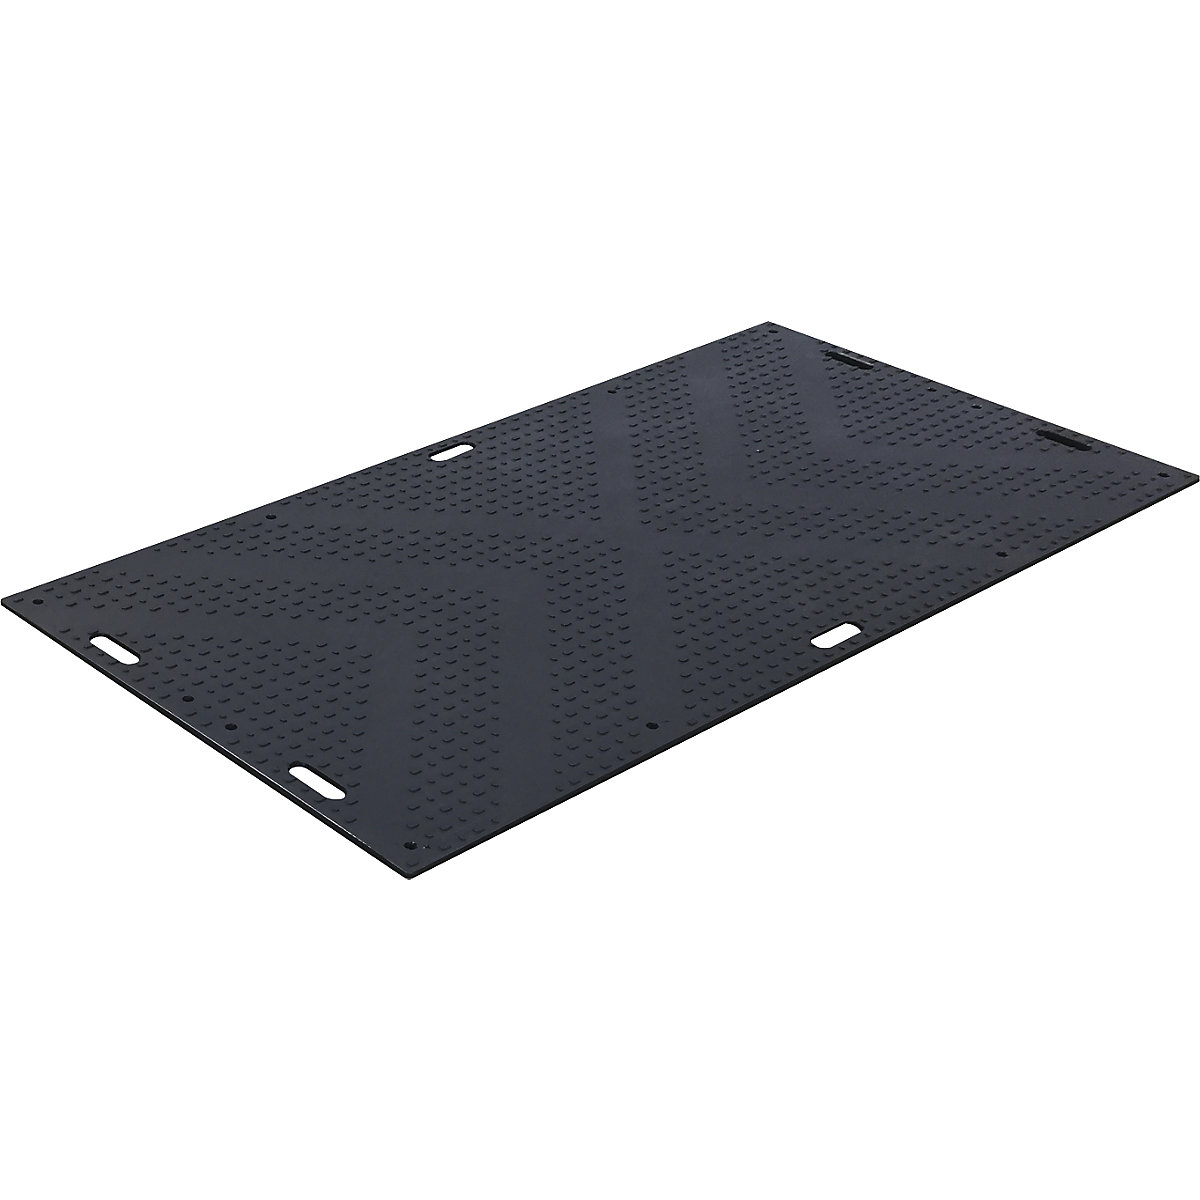 Temporary floor protection matting for medium duty requirements